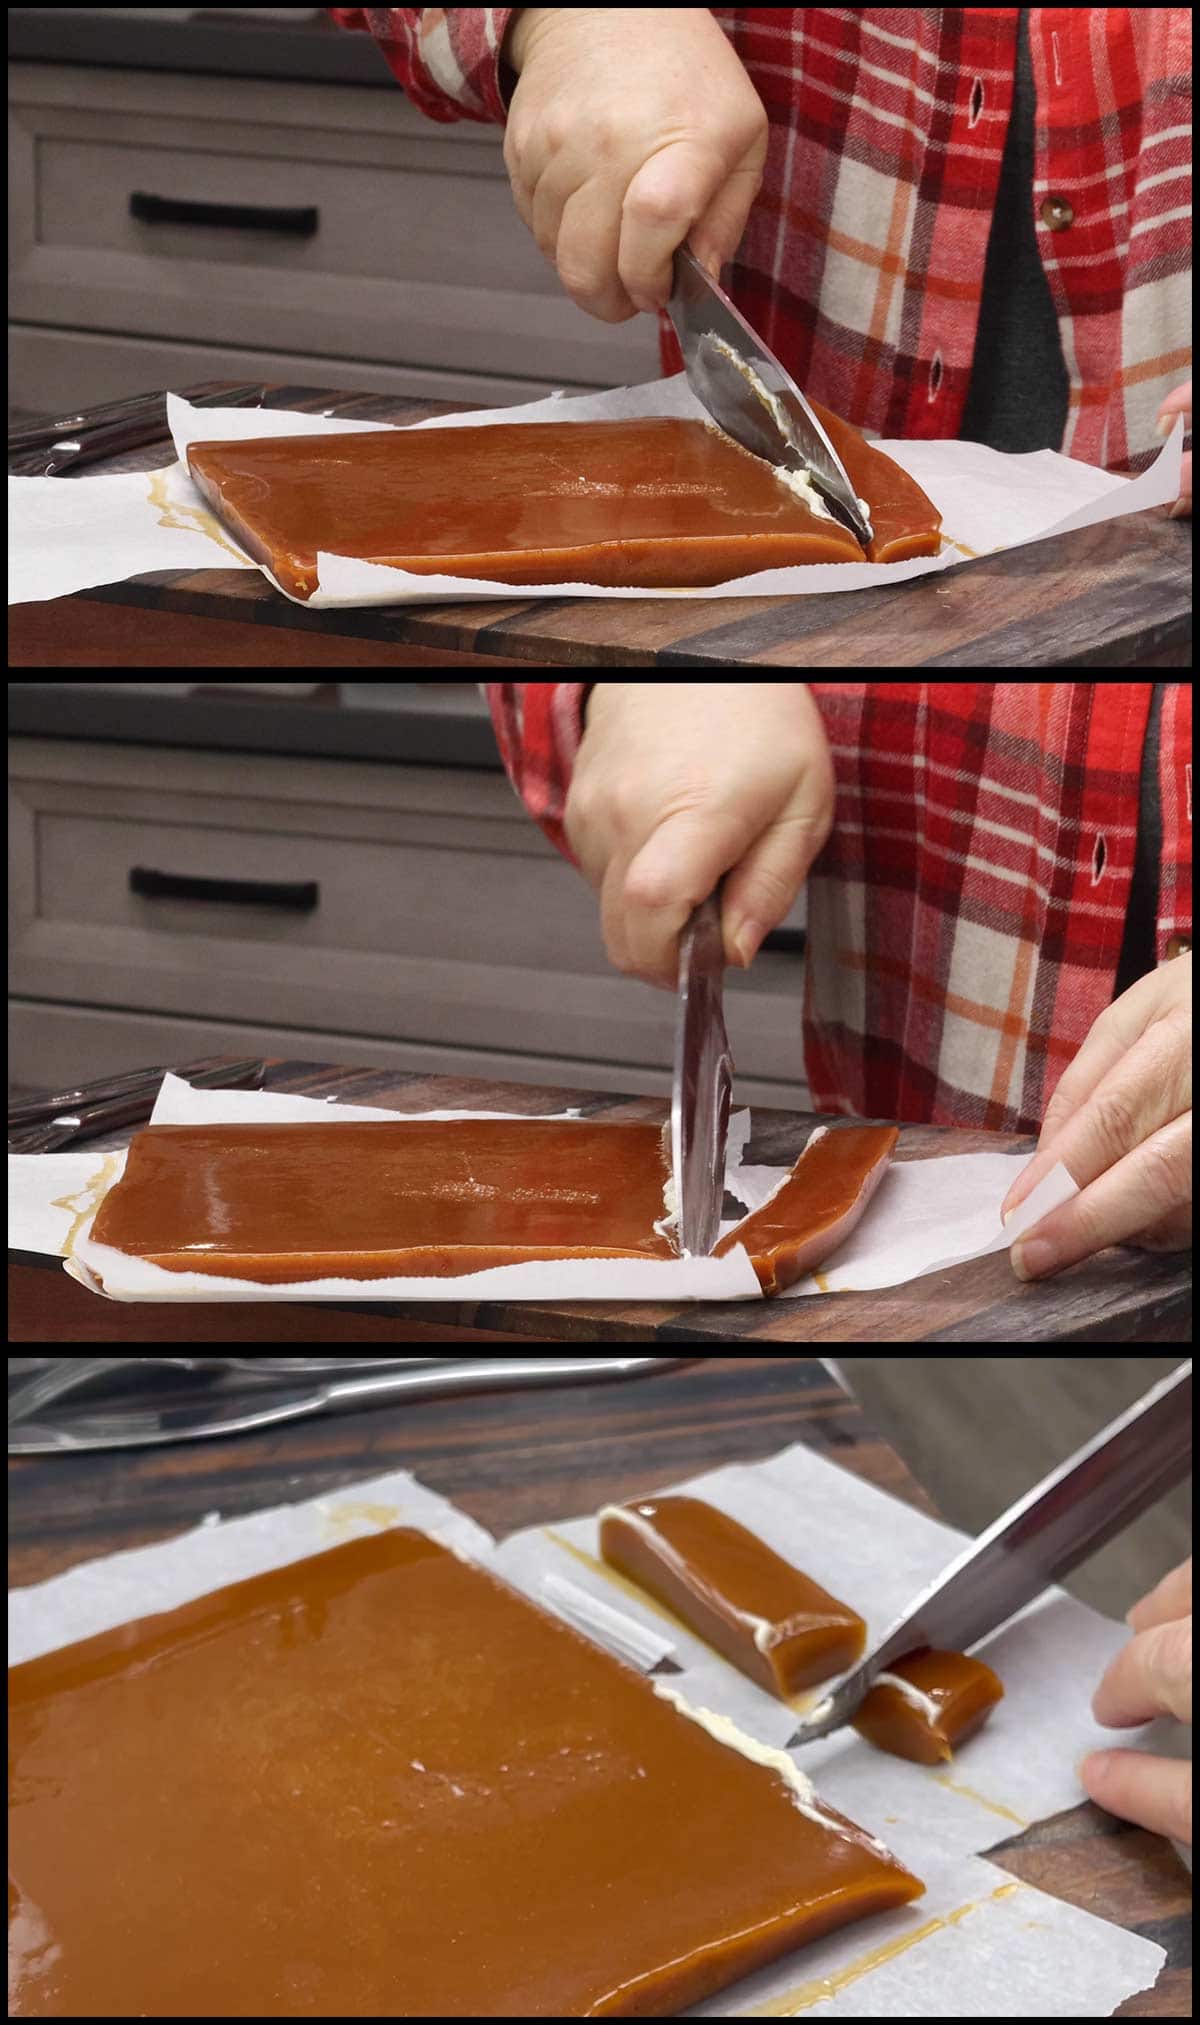 cutting caramel with a knife into small squares.